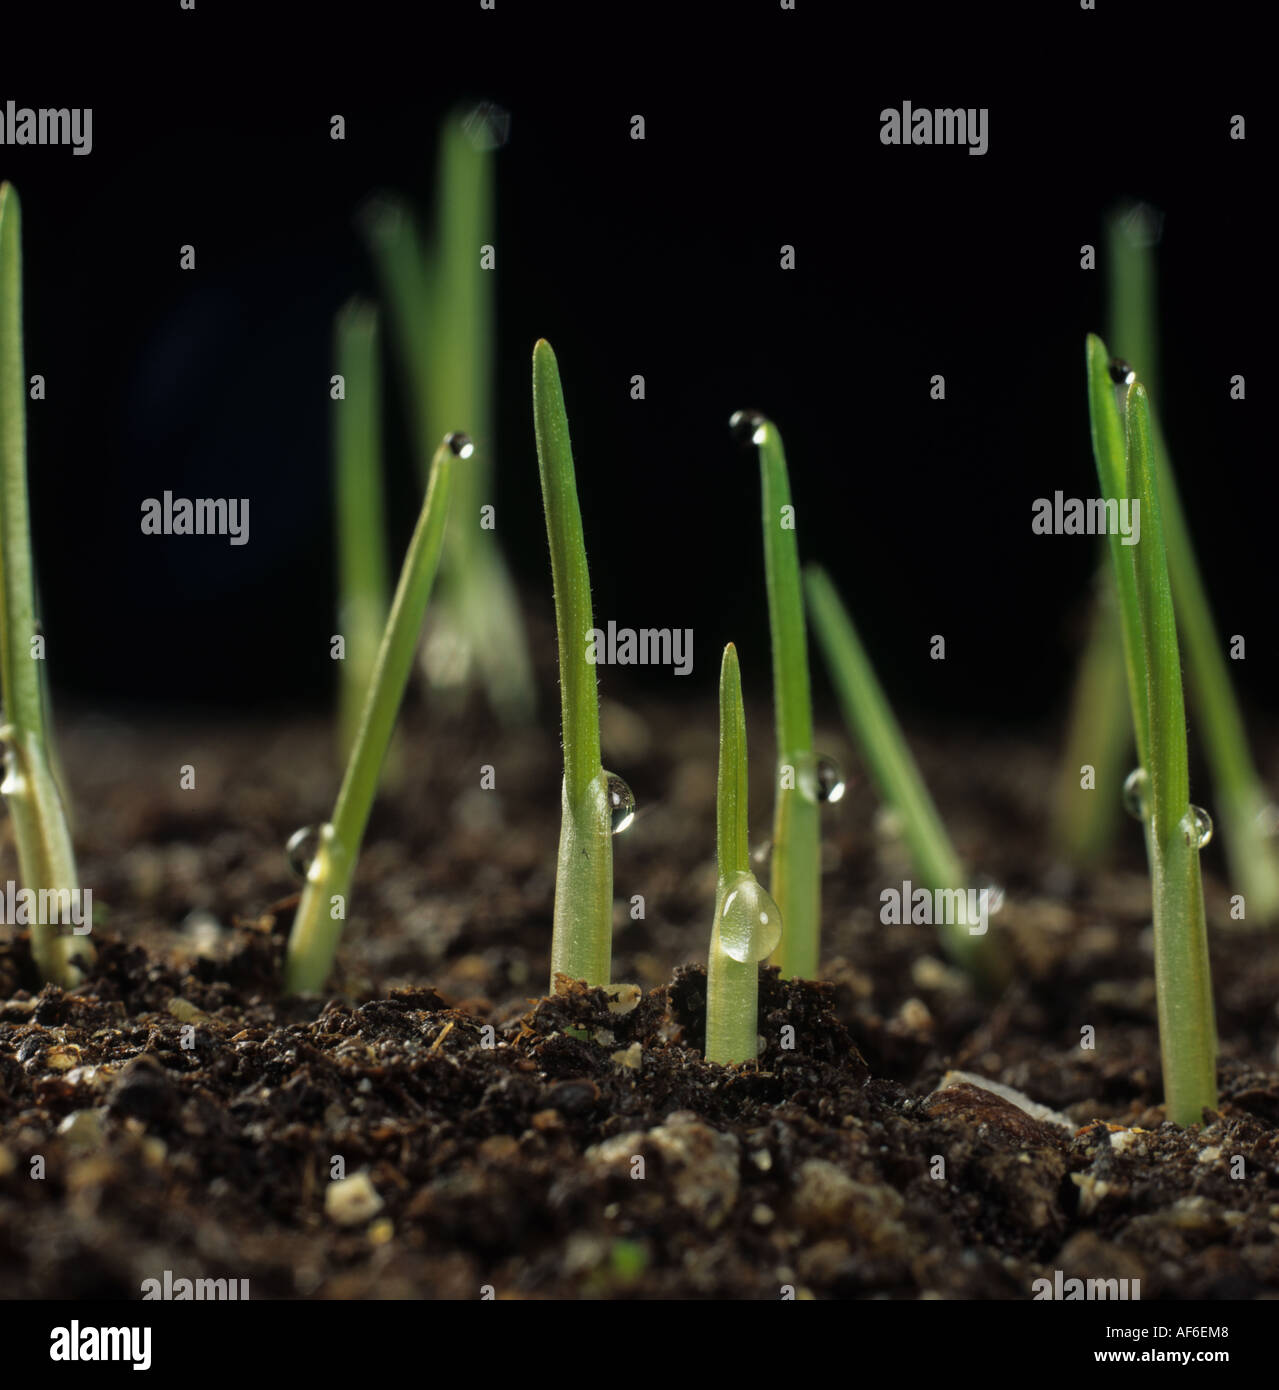 Shoots of young wheat crop emerging above the soil and with exudation droplets Stock Photo